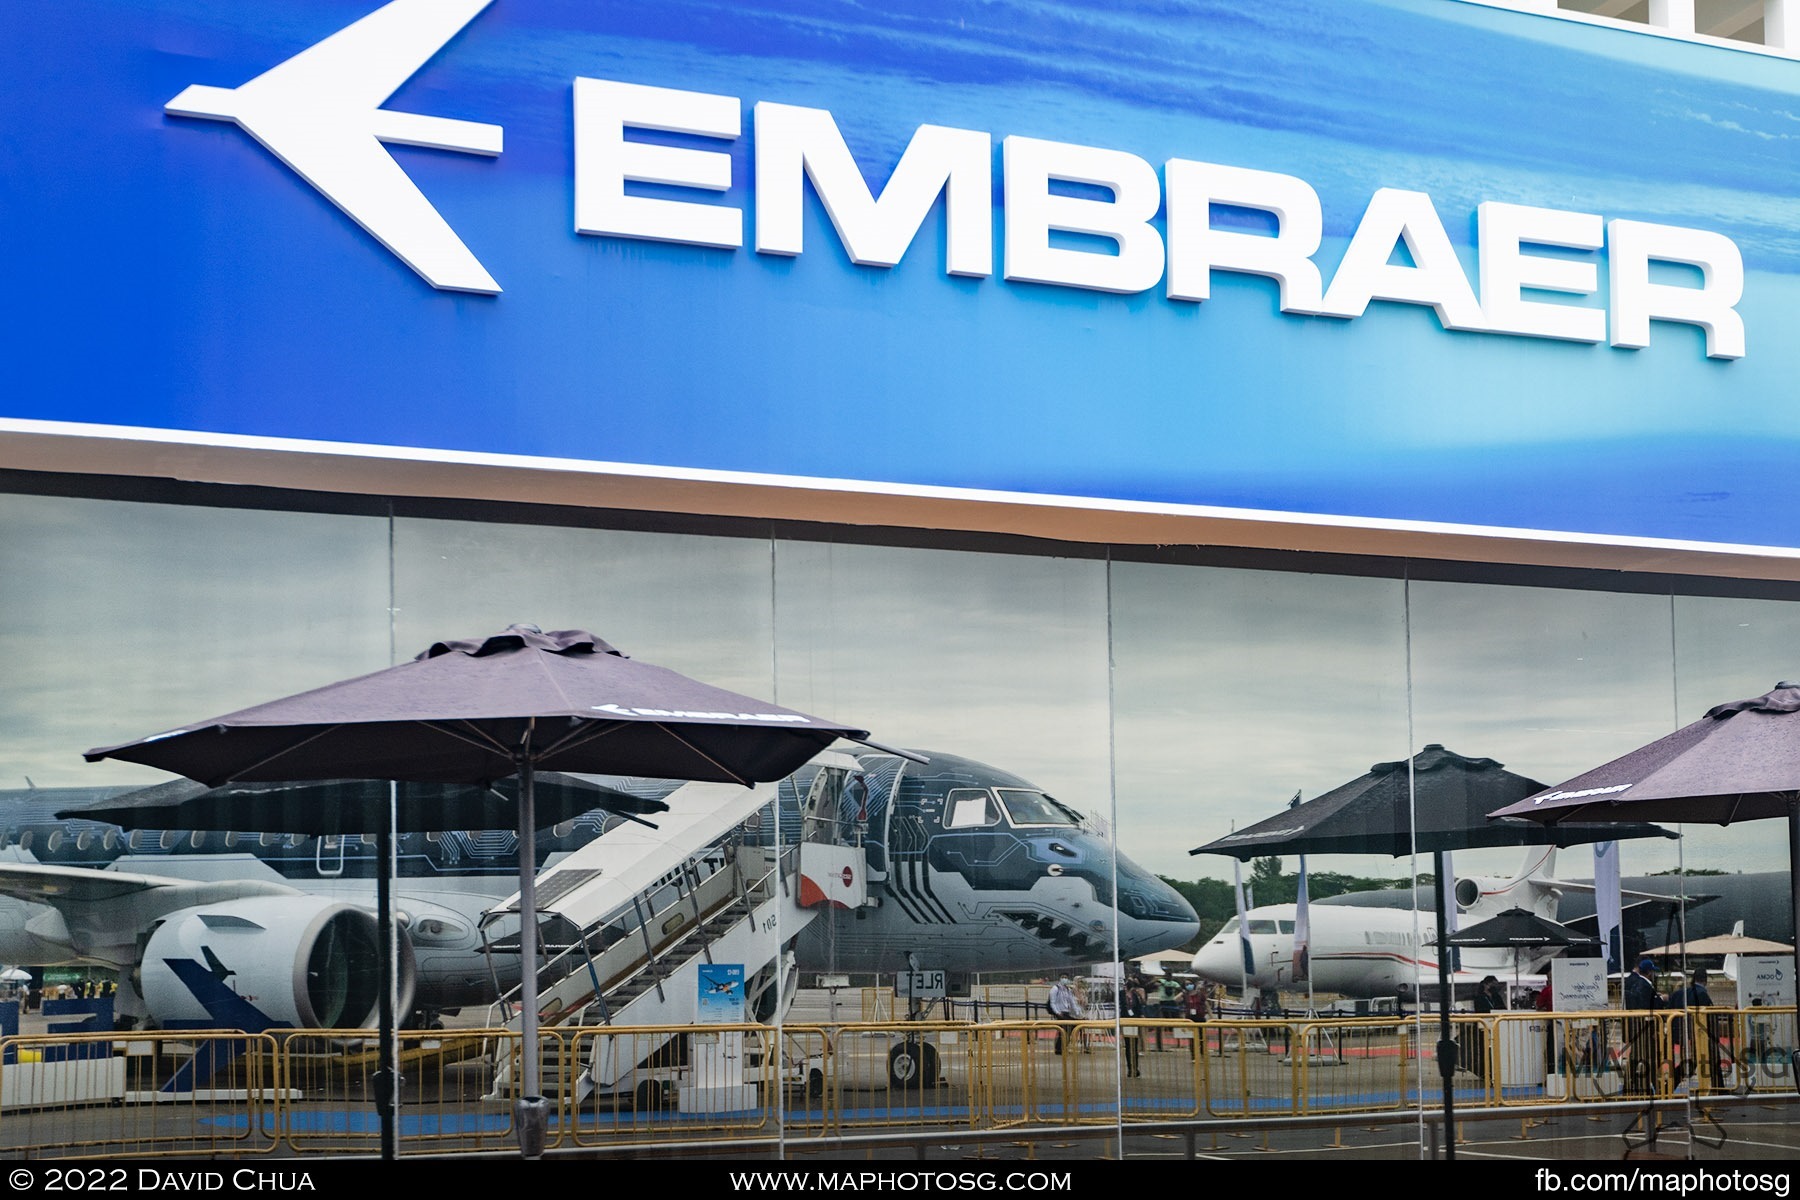 Embraer brought the shark for the Singapore Airshow 2022